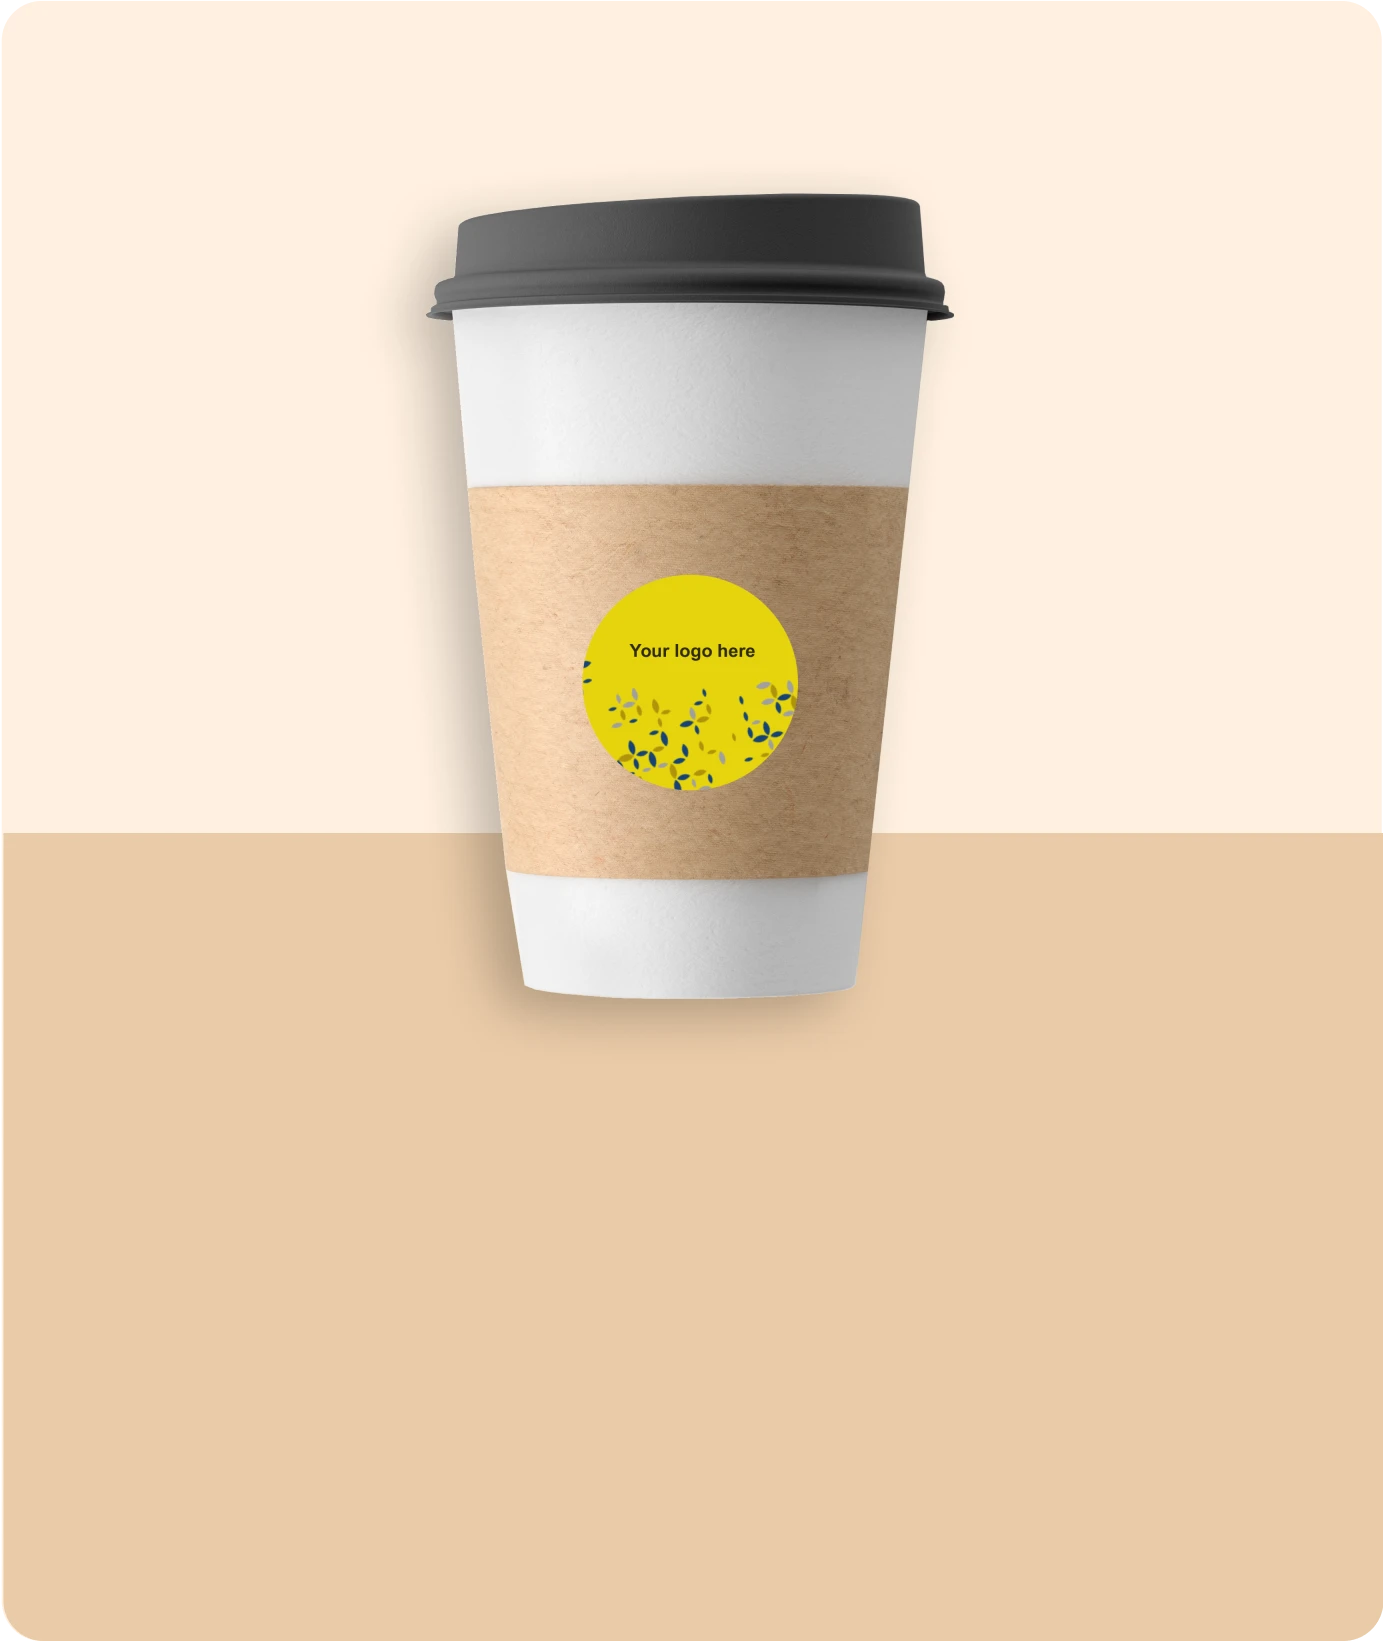 Cup Sleeves related products image | The Box Lane